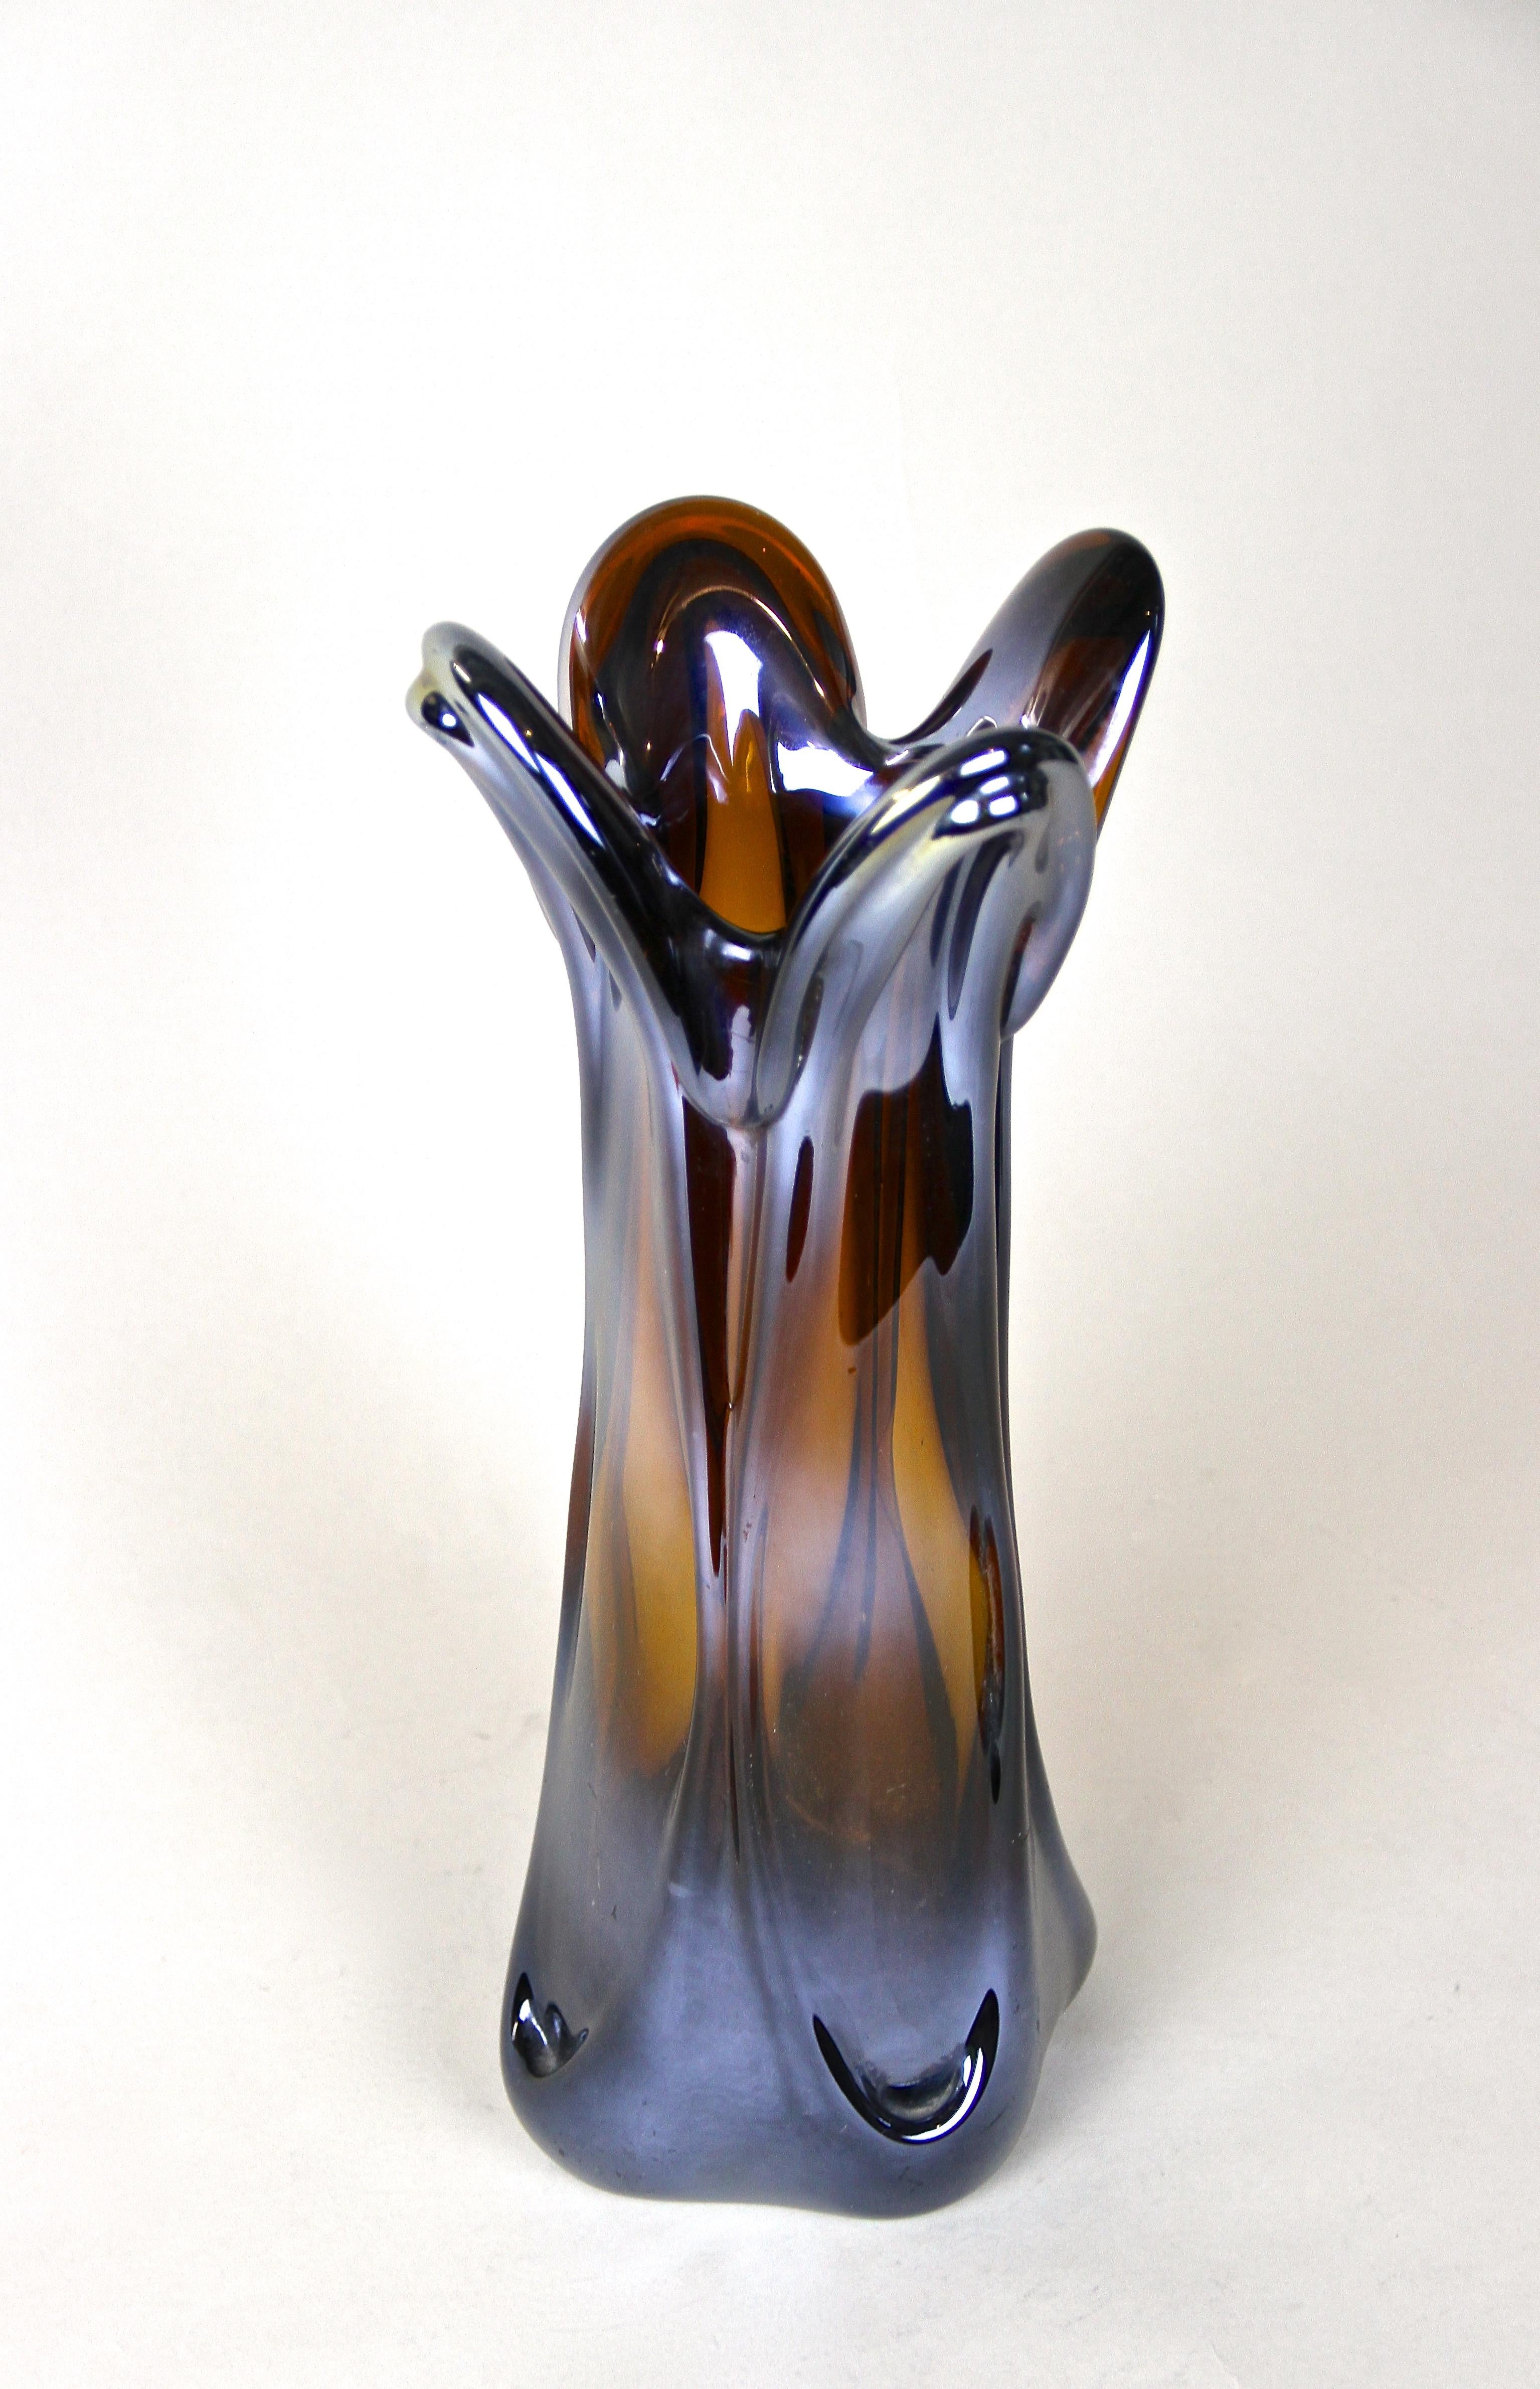 Iridiscent Murano Glass Vase Amber Colored with Chrome Effect, Italy circa 1970 For Sale 11